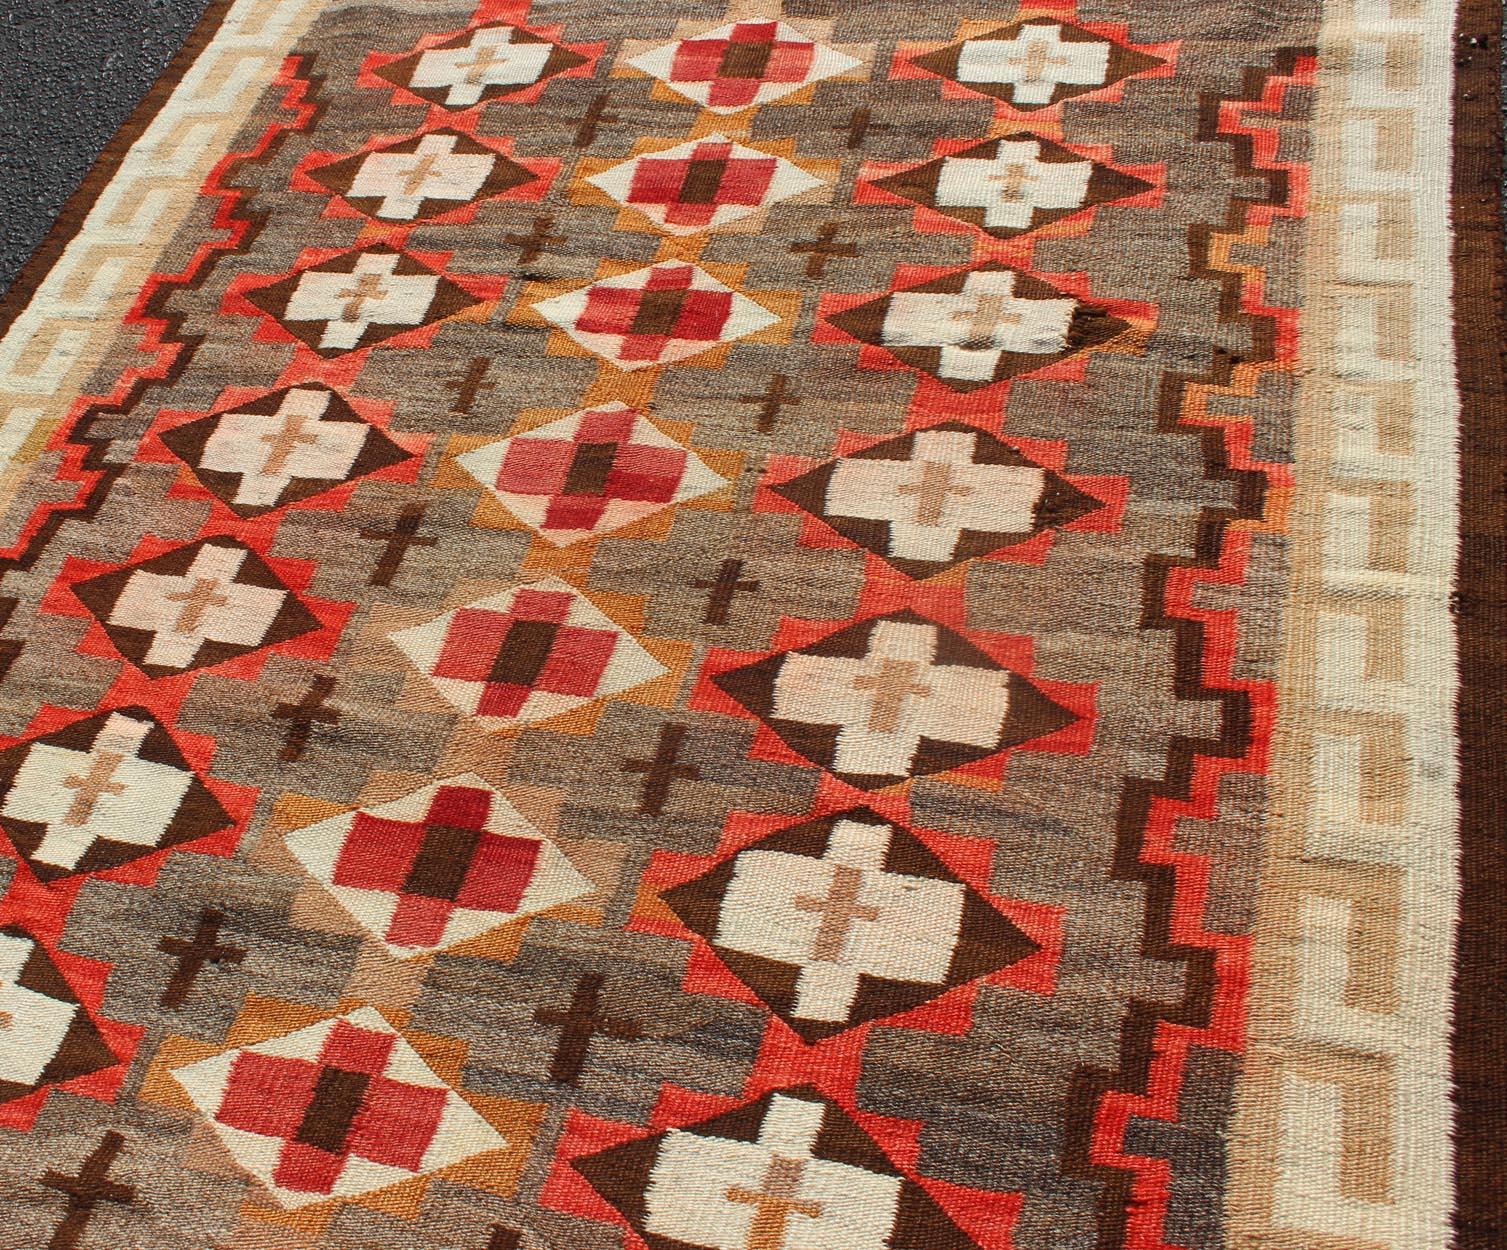 Antique Navajo blanket in multi colors, rug EB-29, country of origin / type: USA / Navajo Tribe
This intriguing antique Navajo rug was woven in the United States during the first half of the 20th century. The exciting and unique composition boasts